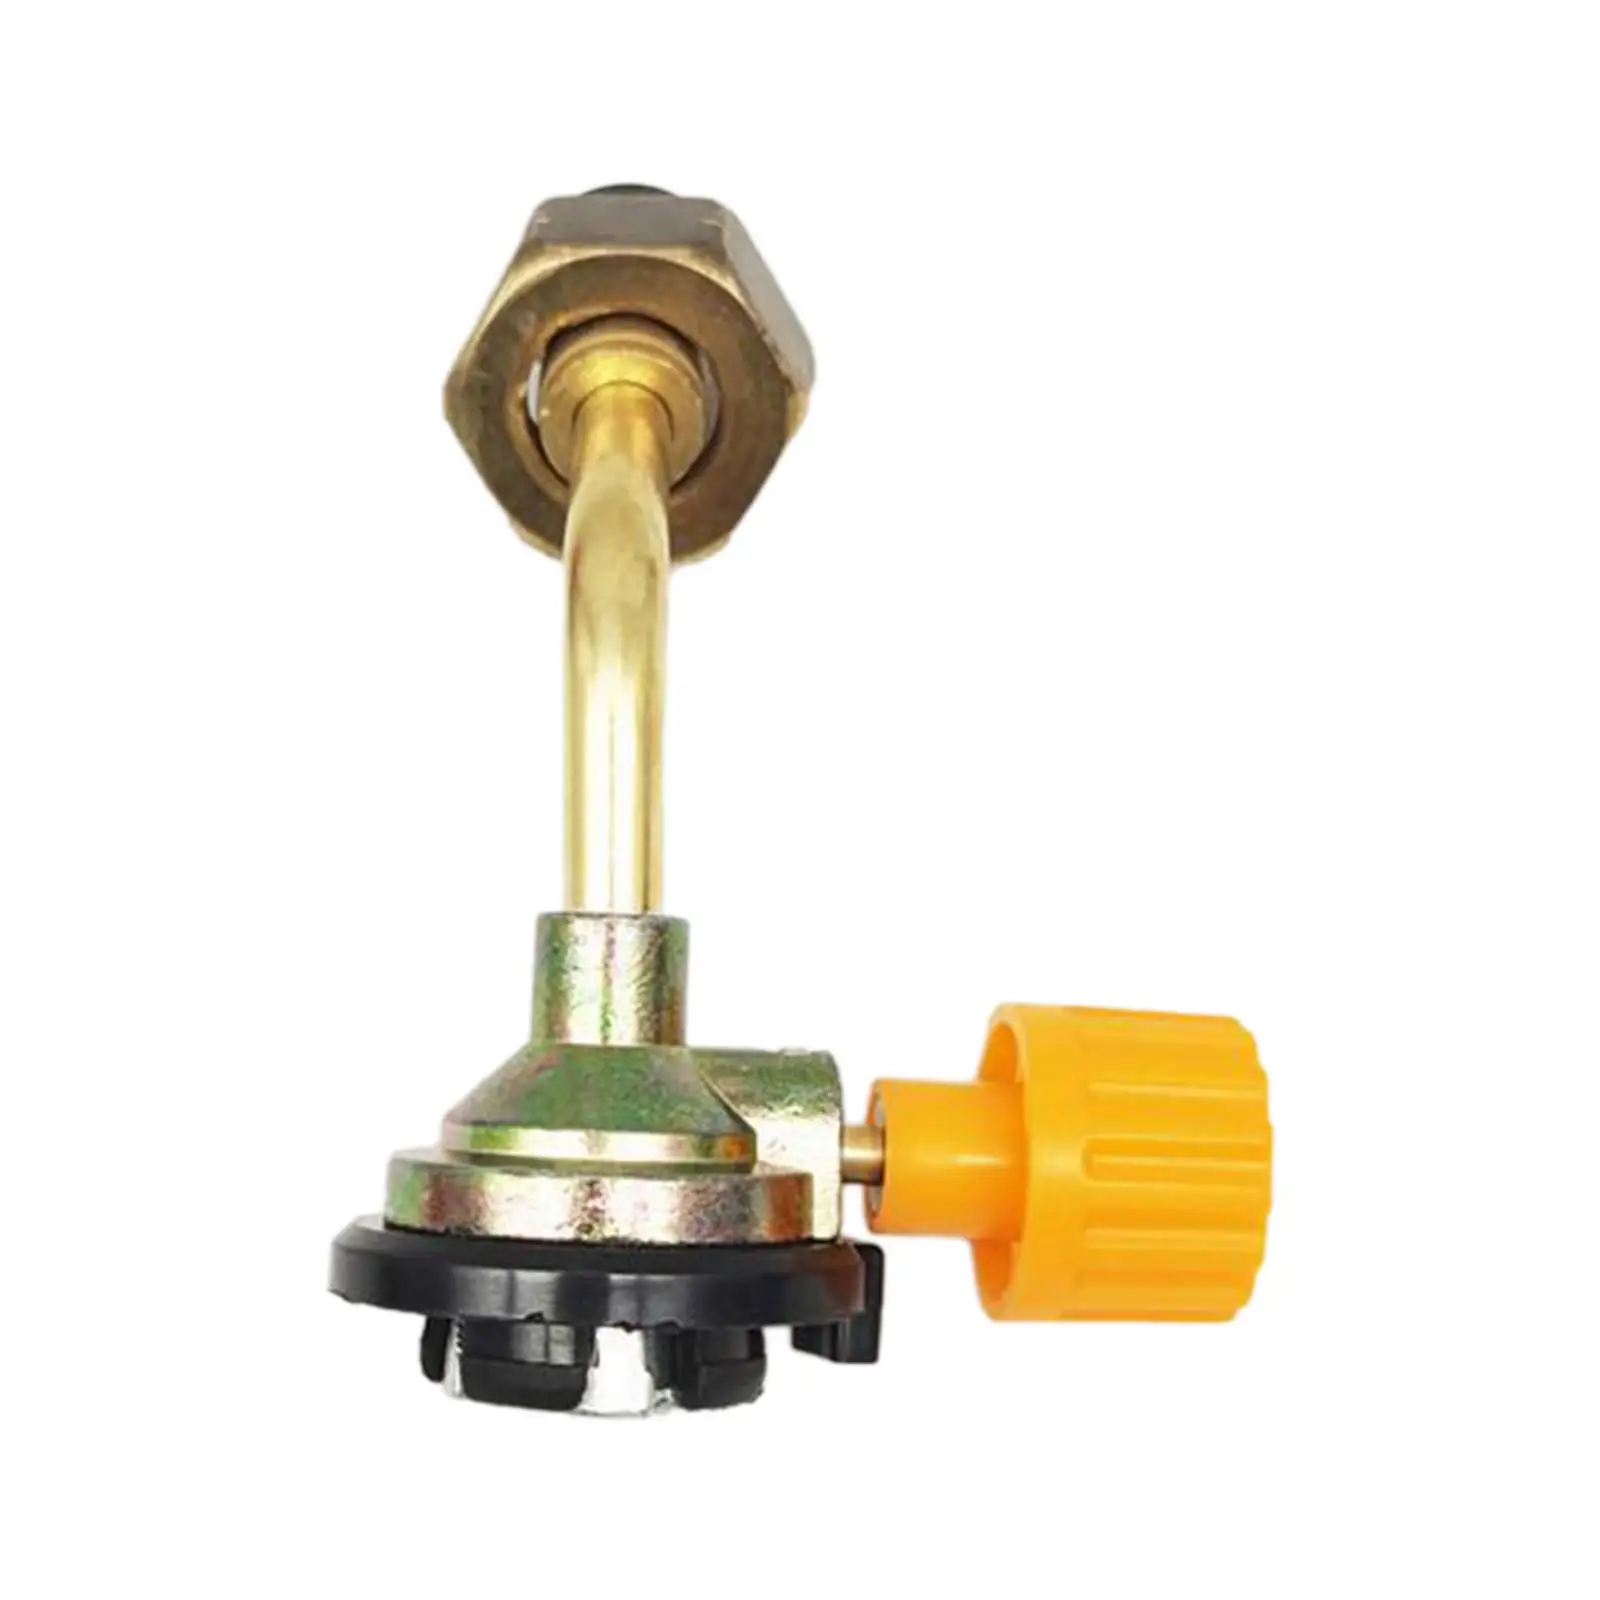 Gas Tank Refill Adapter Cylinder Filling Adapter for Outdoor Camping Picnic